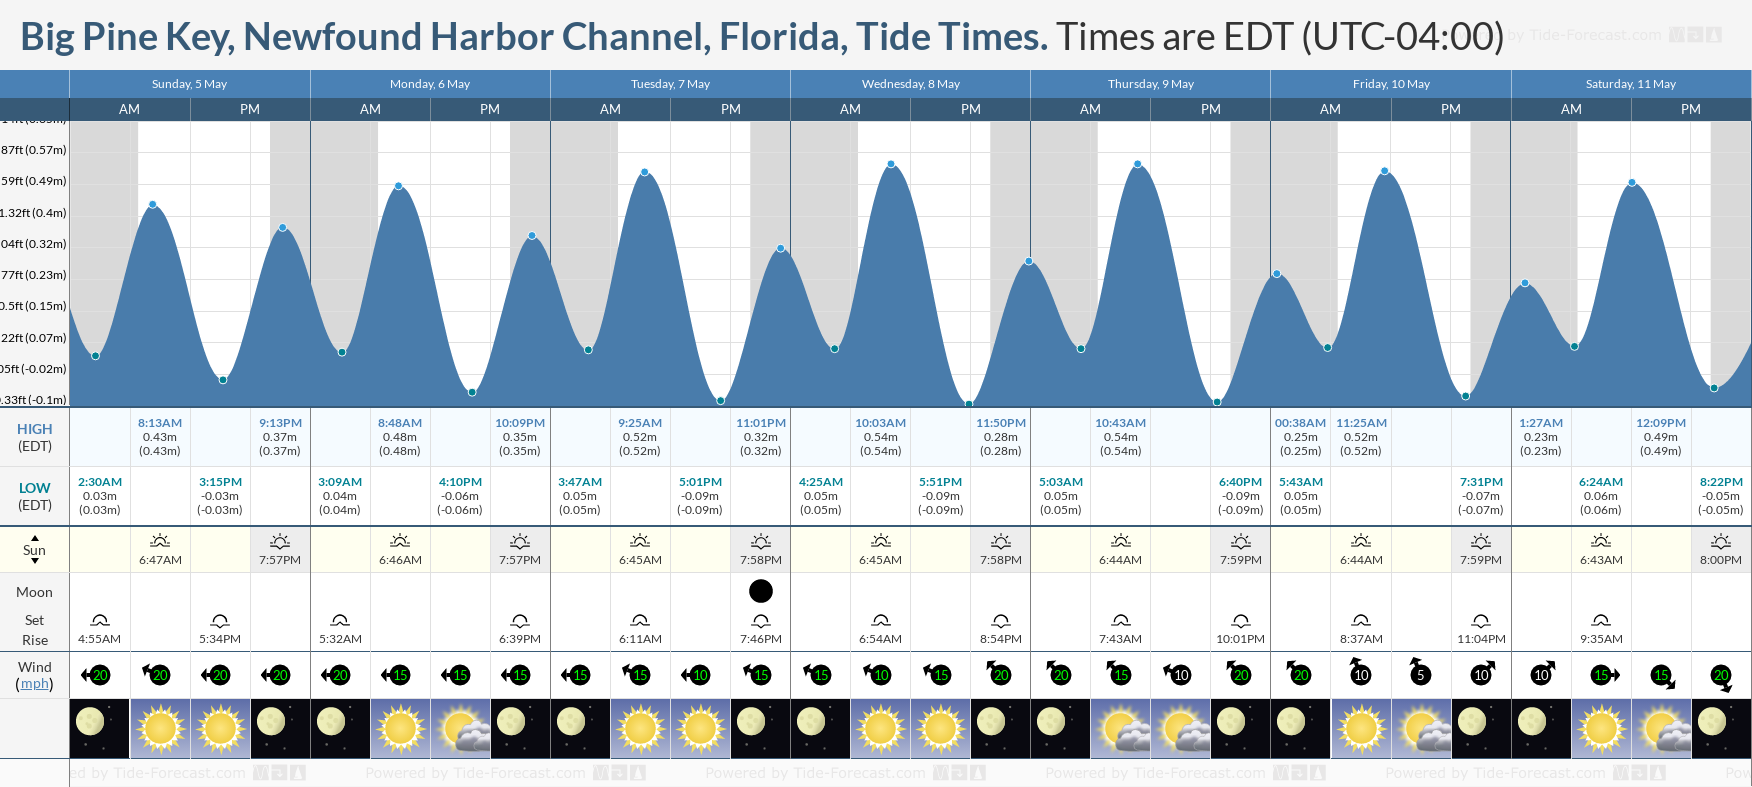 Big Pine Key, Newfound Harbor Channel, Florida Tide Chart including high and low tide tide times for the next 7 days